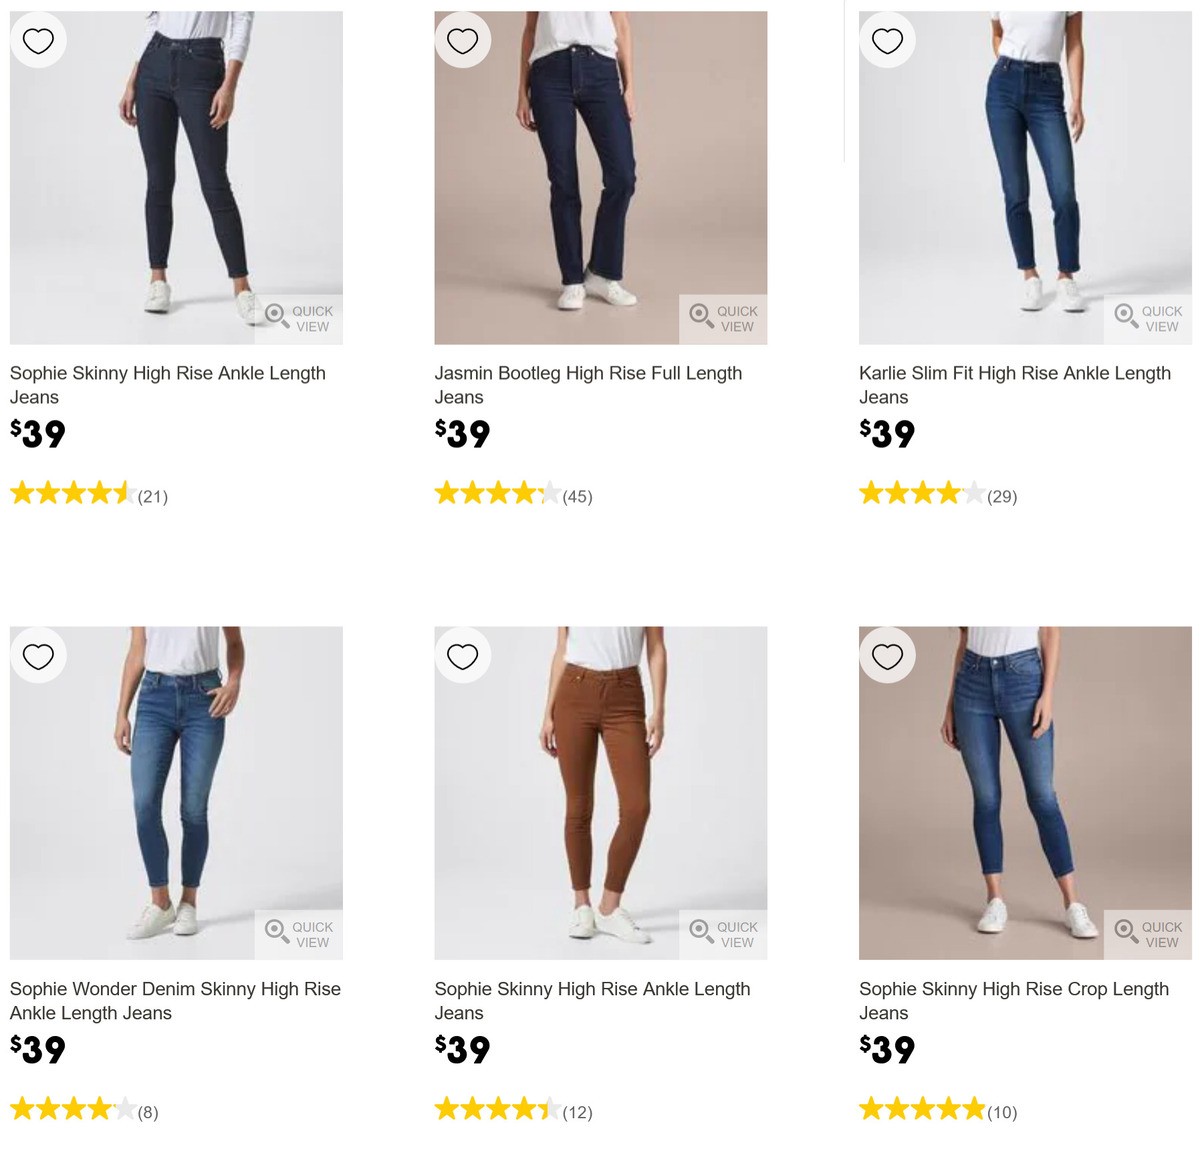 Target Denim for Everybody Catalogues from 10 June